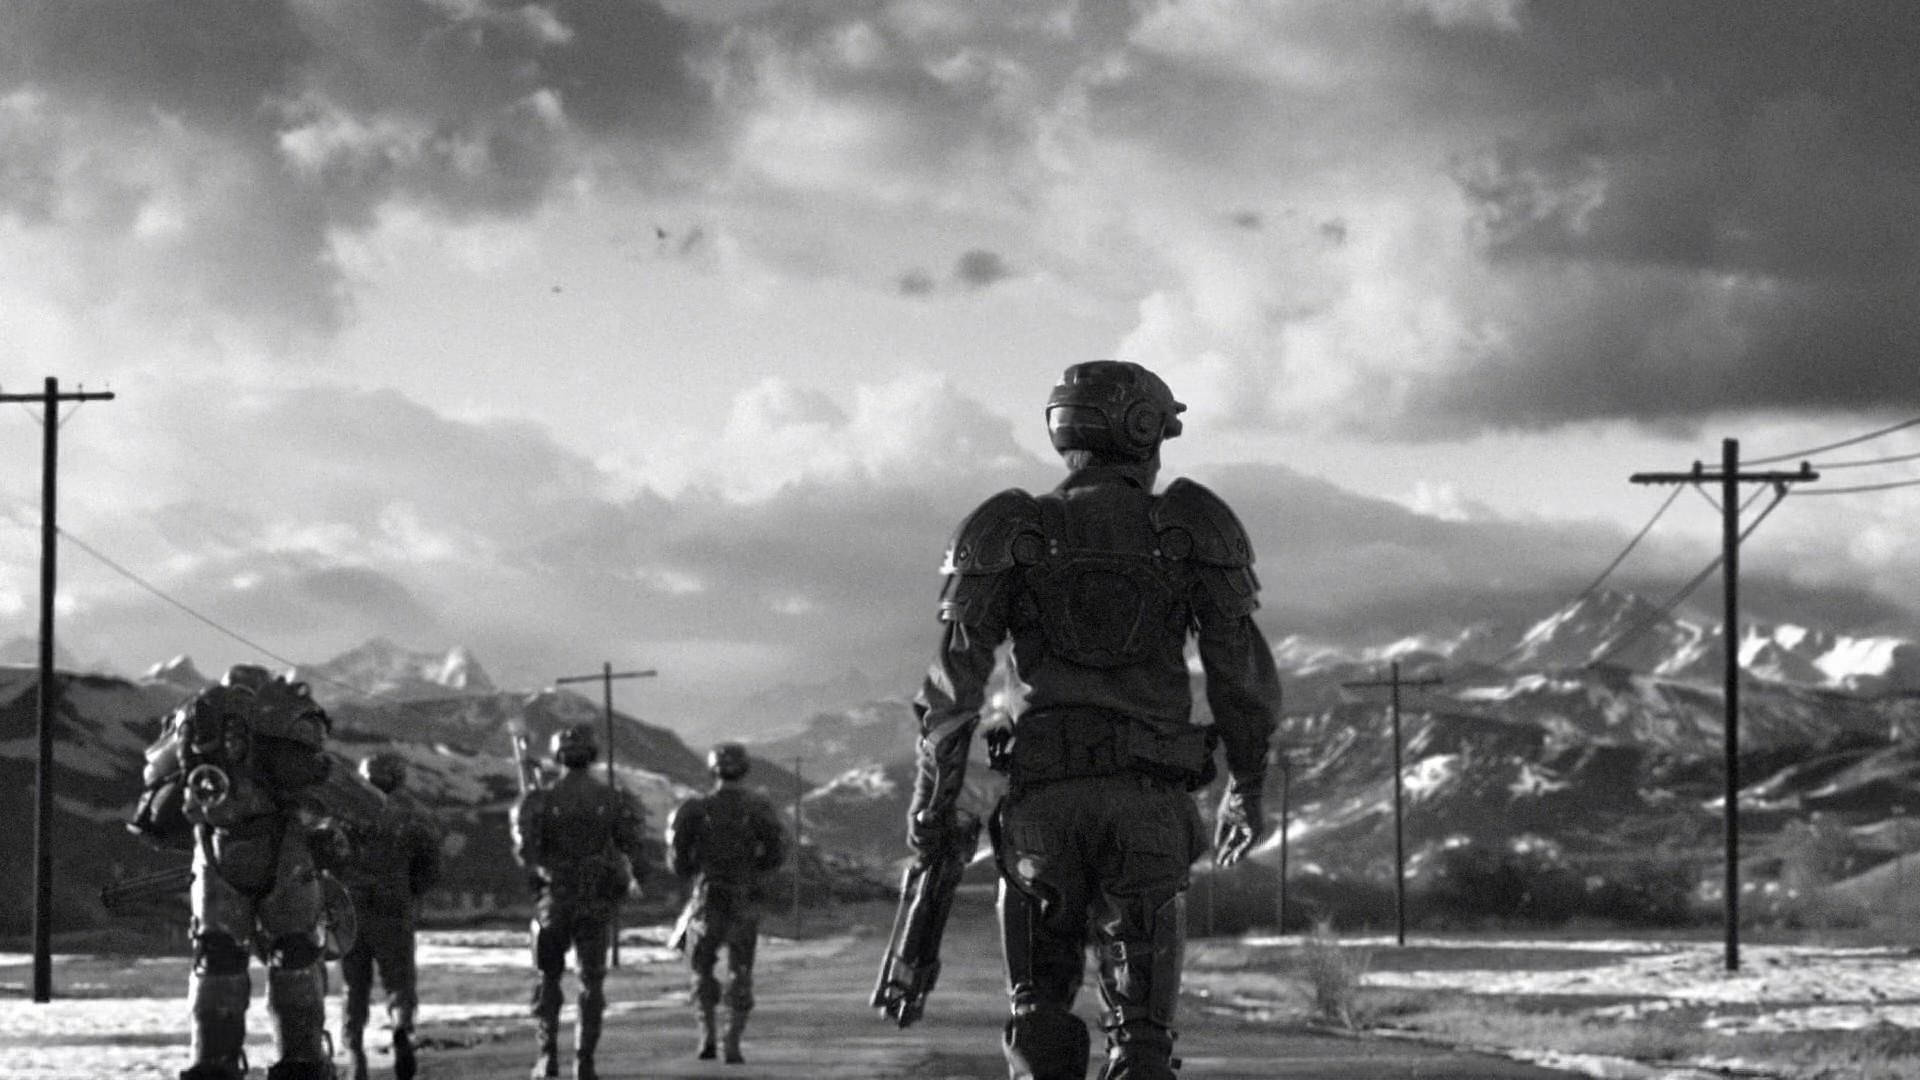 Welcome to the Wasteland in Black and White Wallpaper